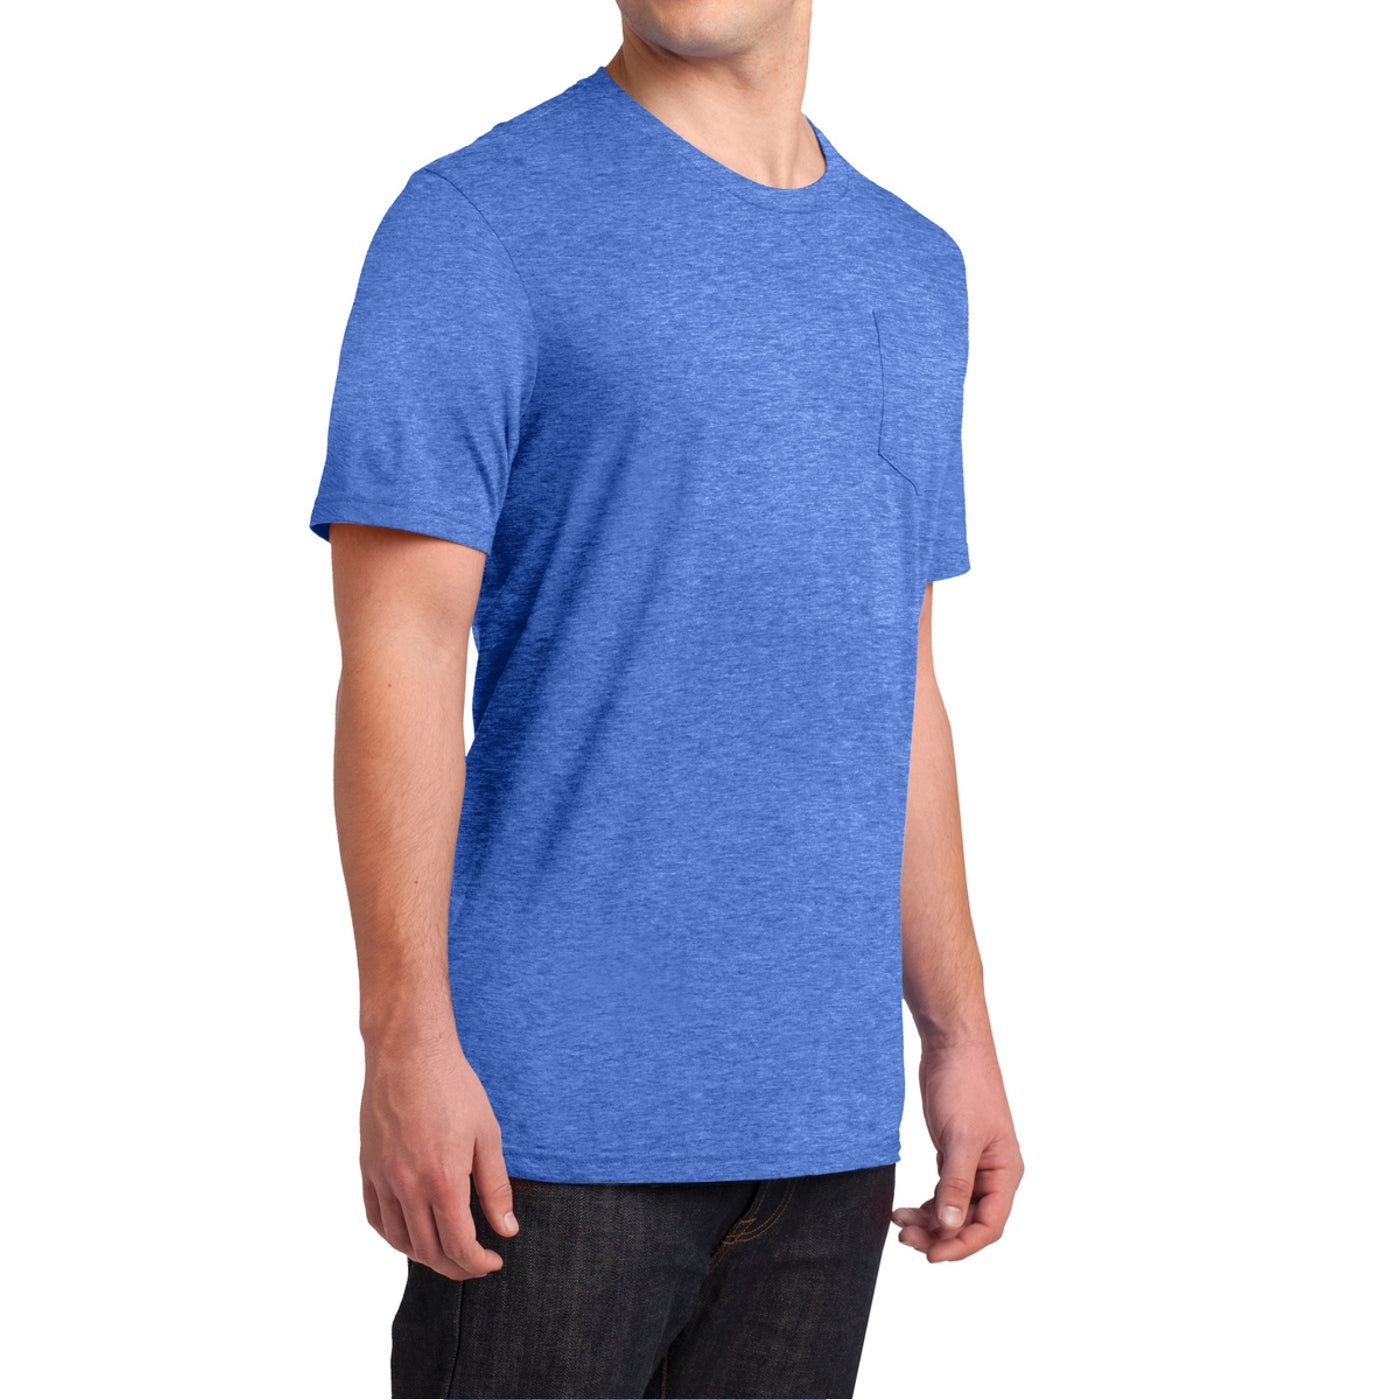 Men's Young Very Important Tee with Pocket - Heathered Royal